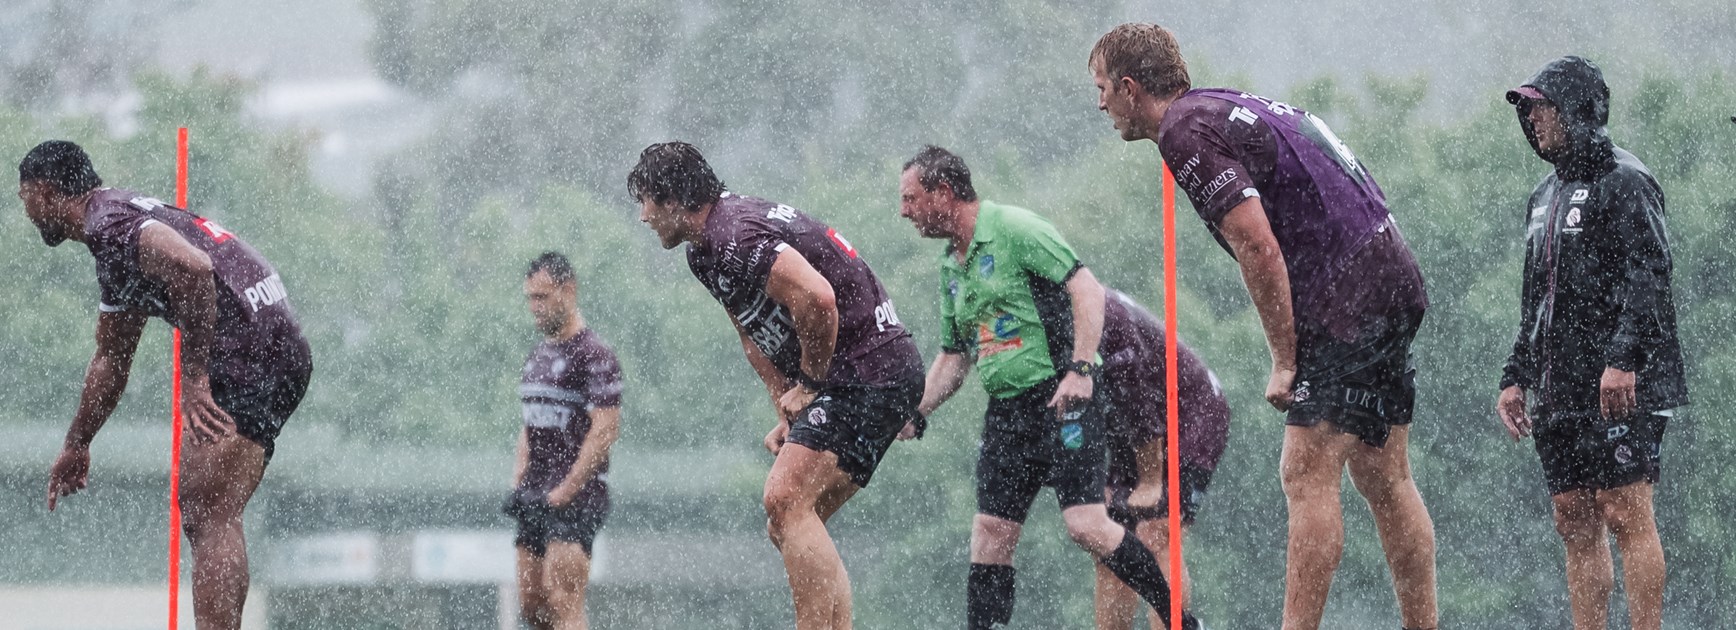 Sea Eagles build on connection at AIS camp